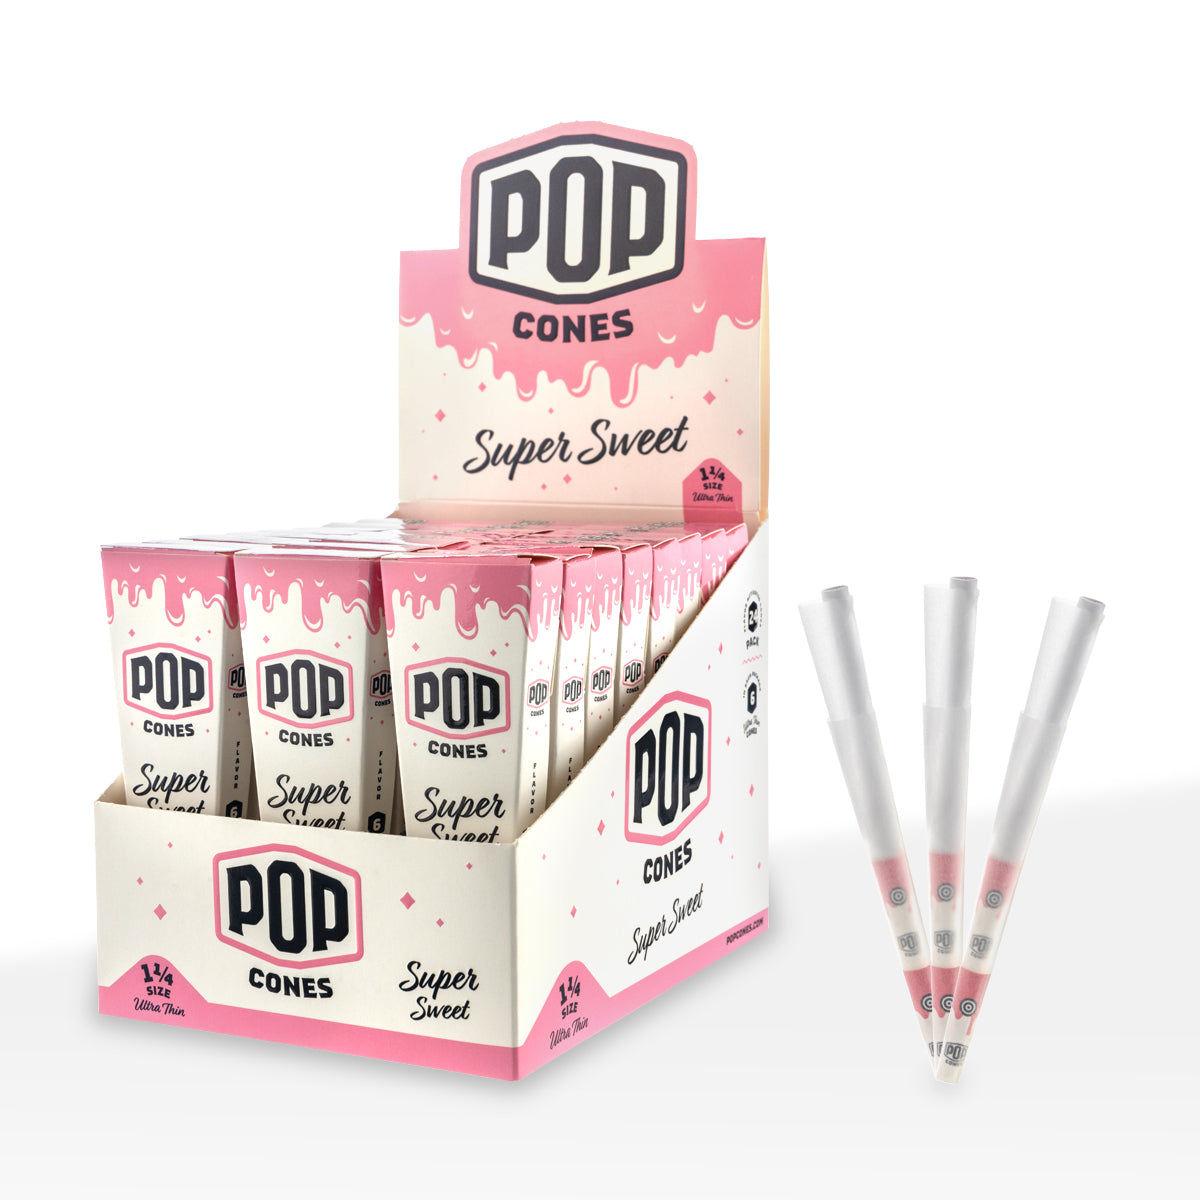 Pop Cones | Ultra Thin Pre-Rolled Cones 1¼ Size | 78mm - Various Flavors - 6 Pack 24 Count Pre-Rolled Cones Biohazard Inc Super Sweet  